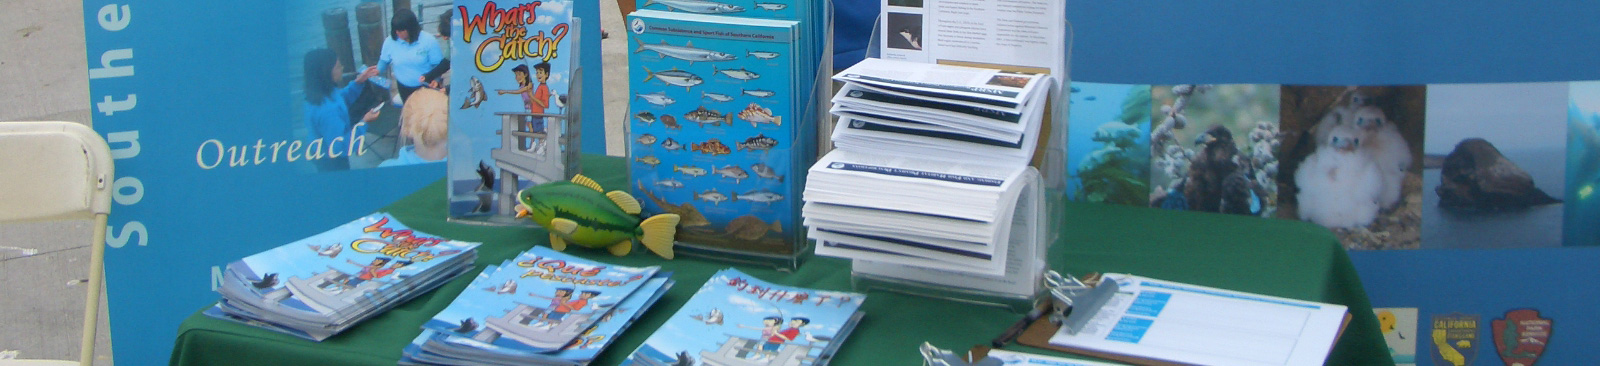 Table with fishing brochures